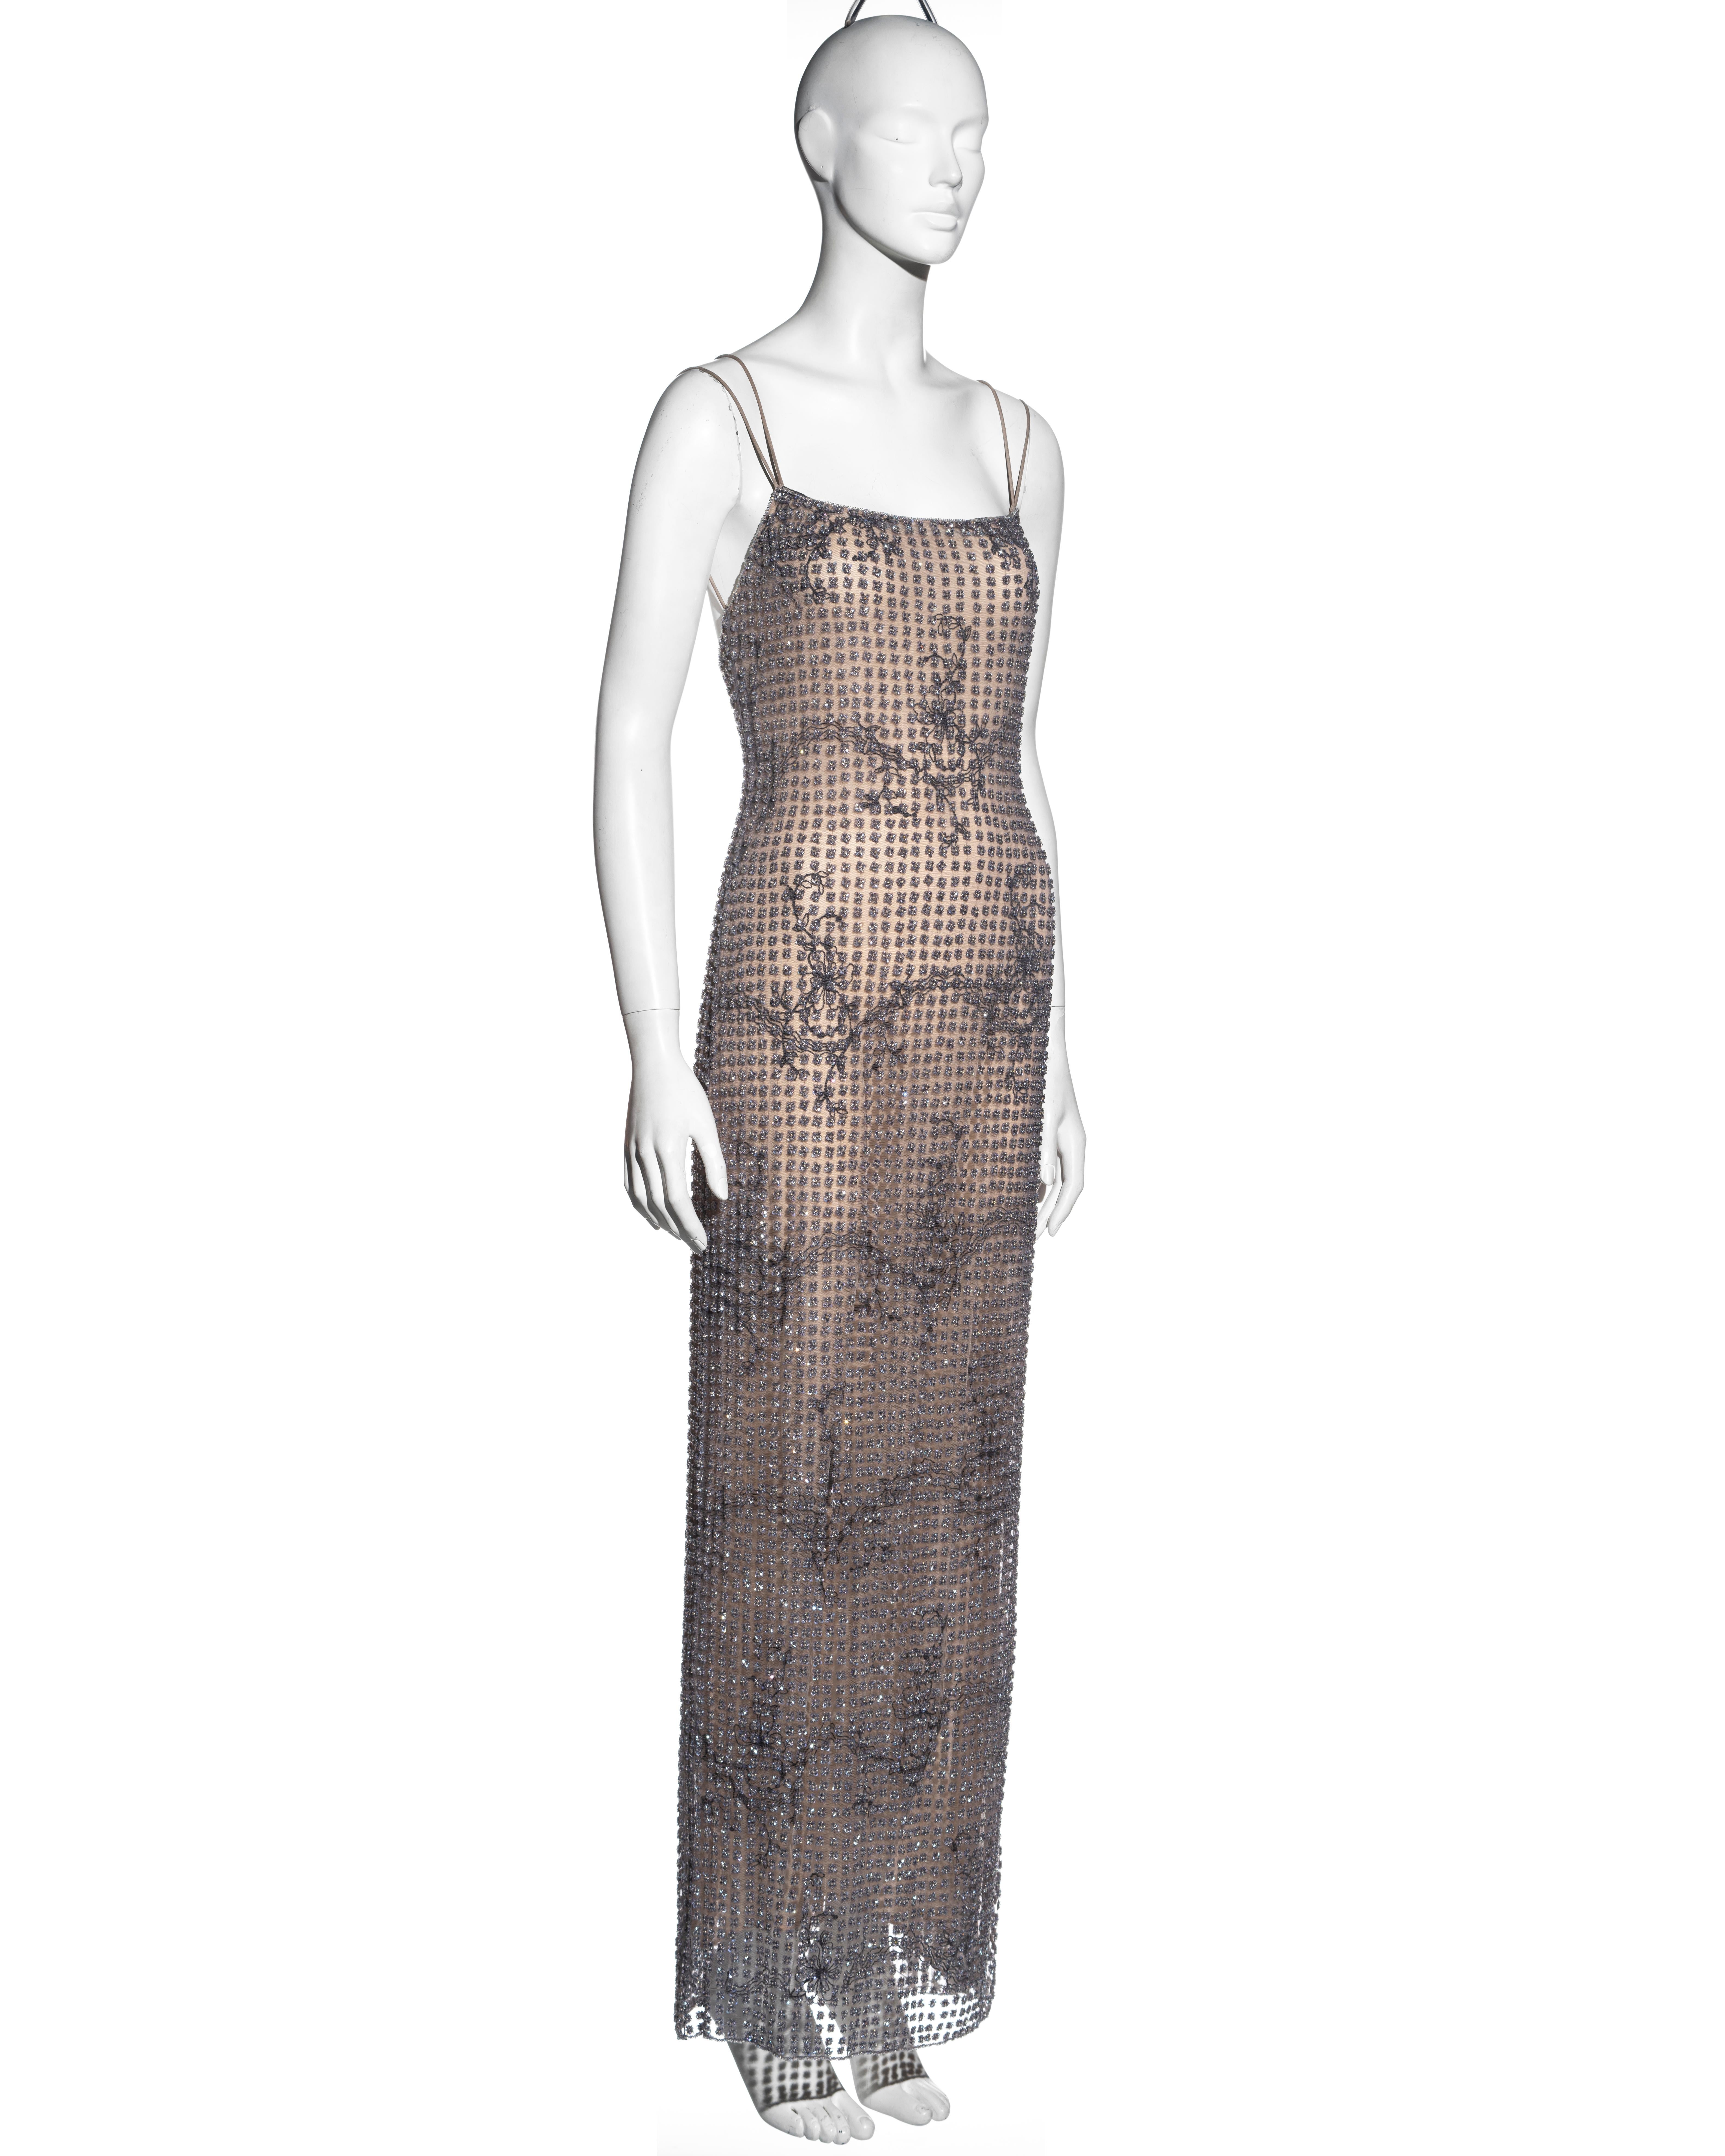 Giorgio Armani lavender beaded tulle evening dress with embroidery, ss 2000 1